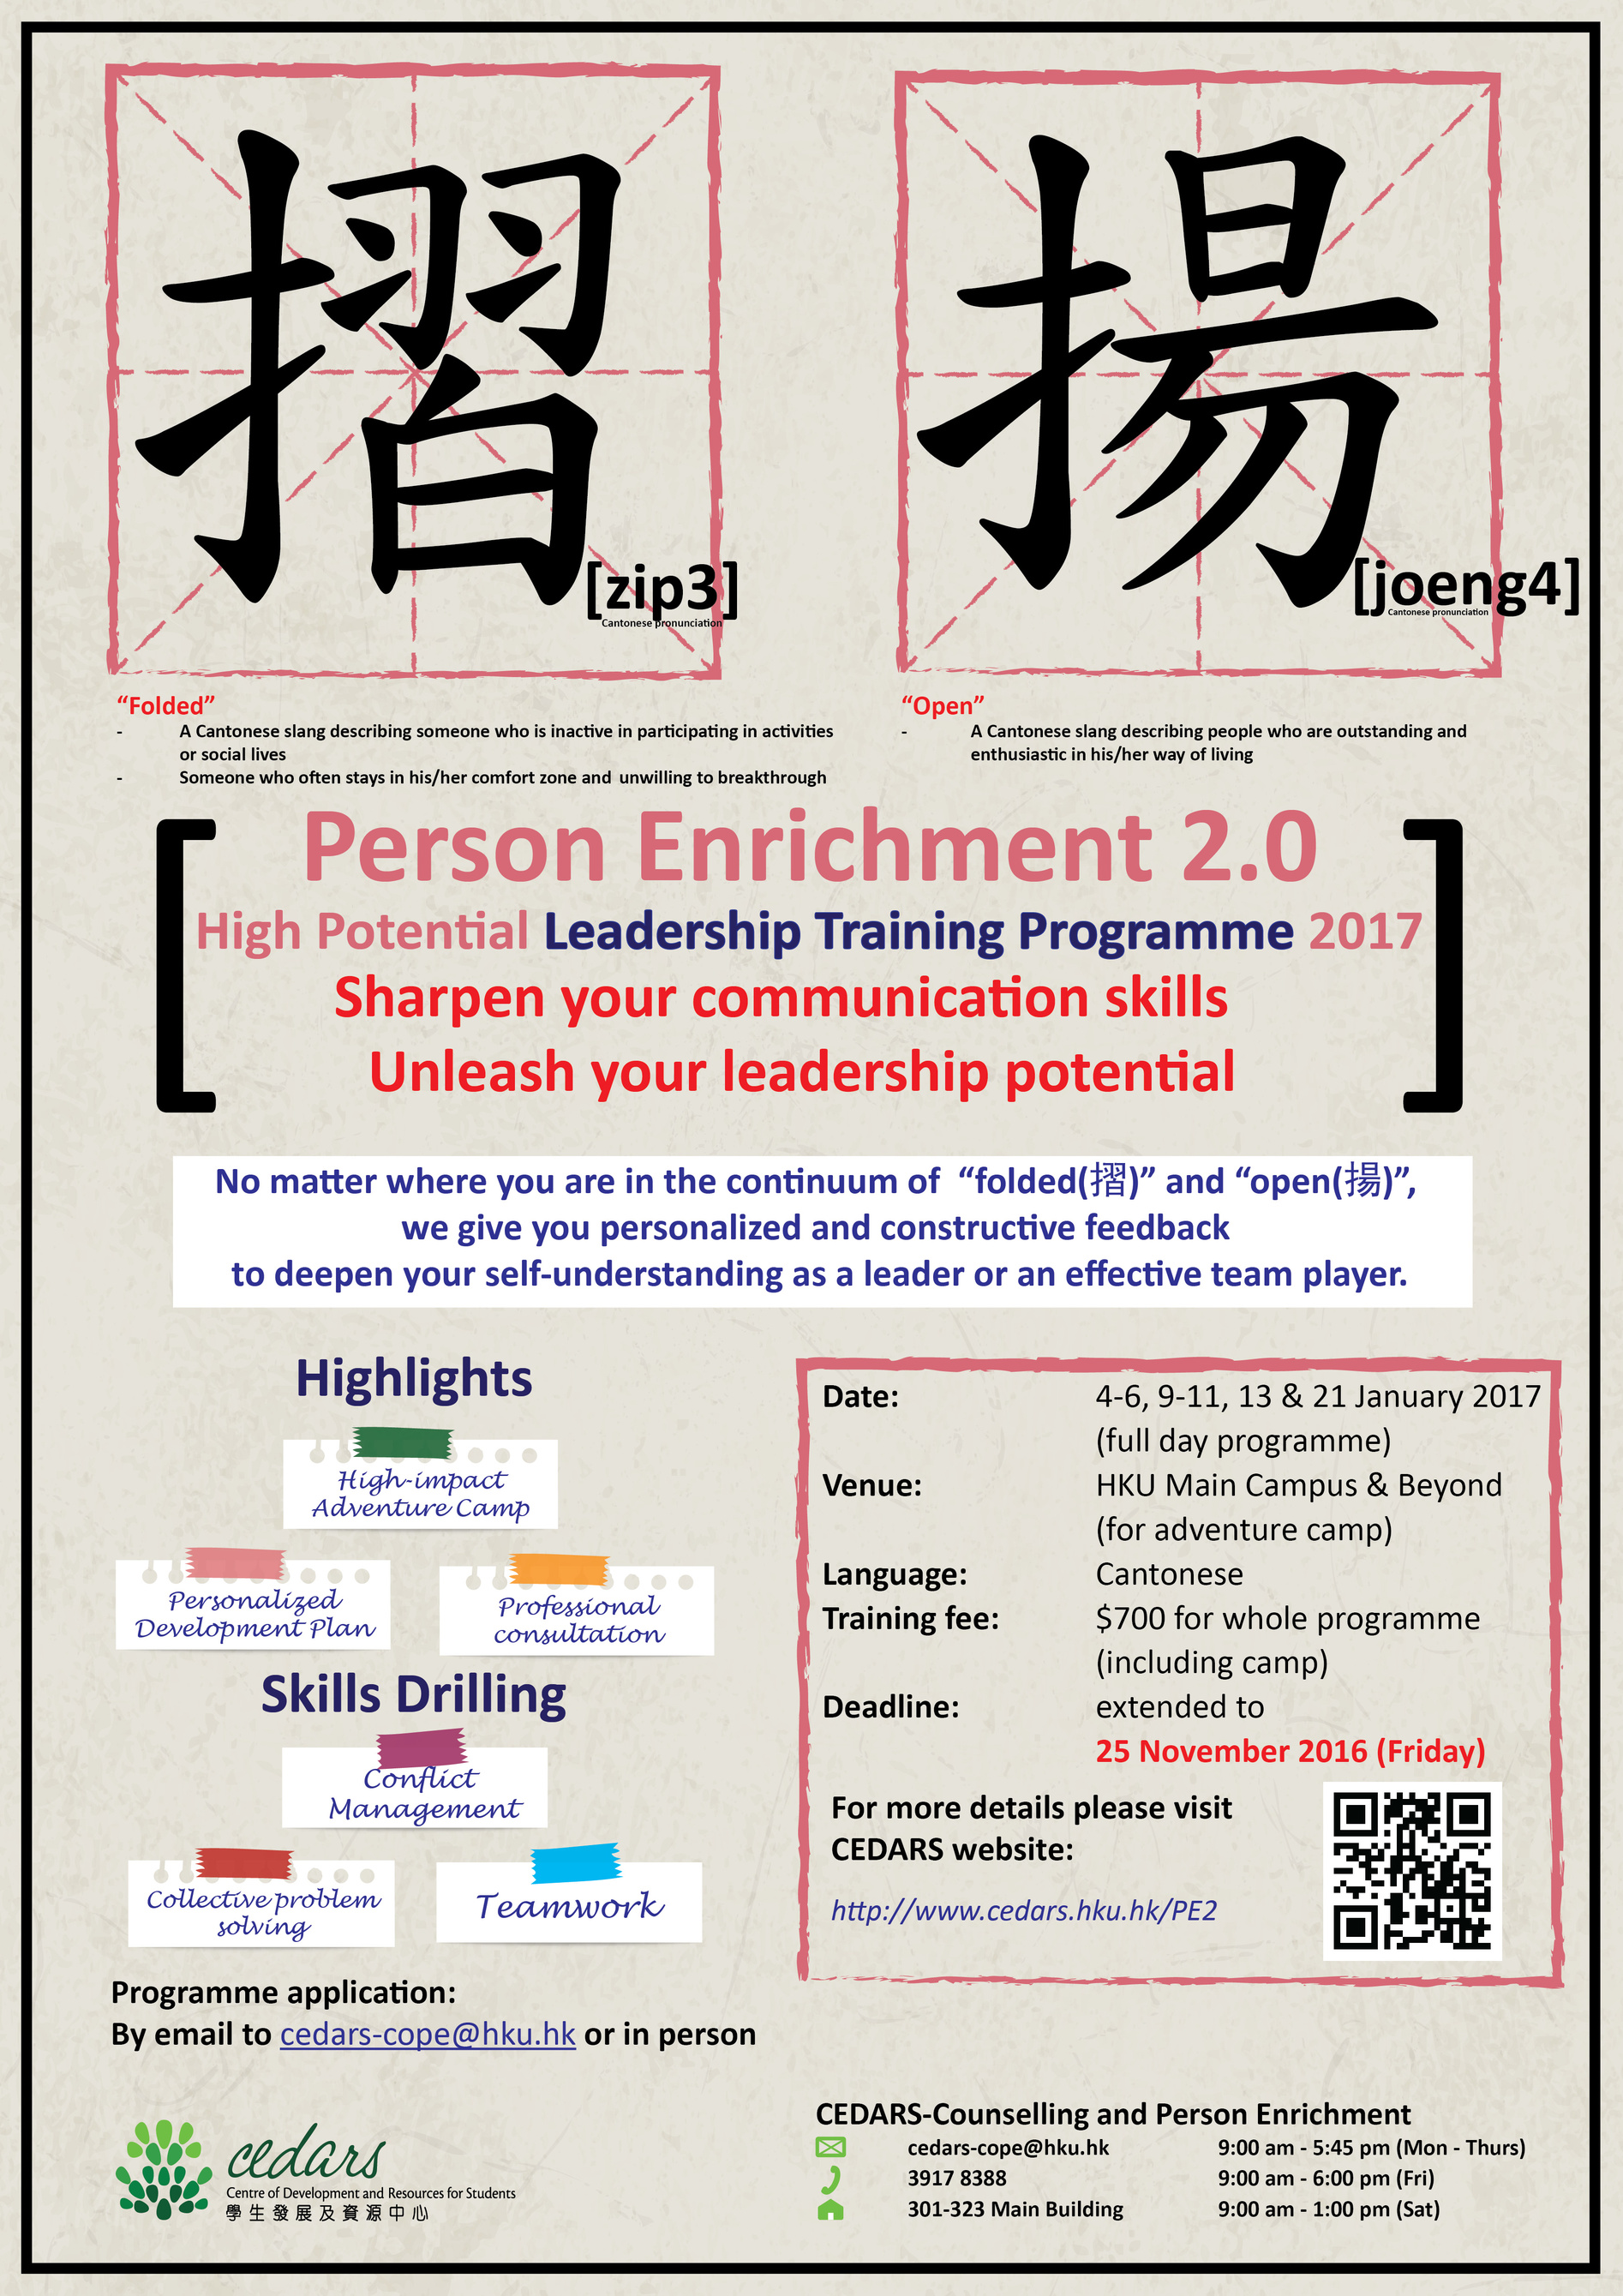 Person Enrichment 2.0 - High Potential Leadership Training Programme